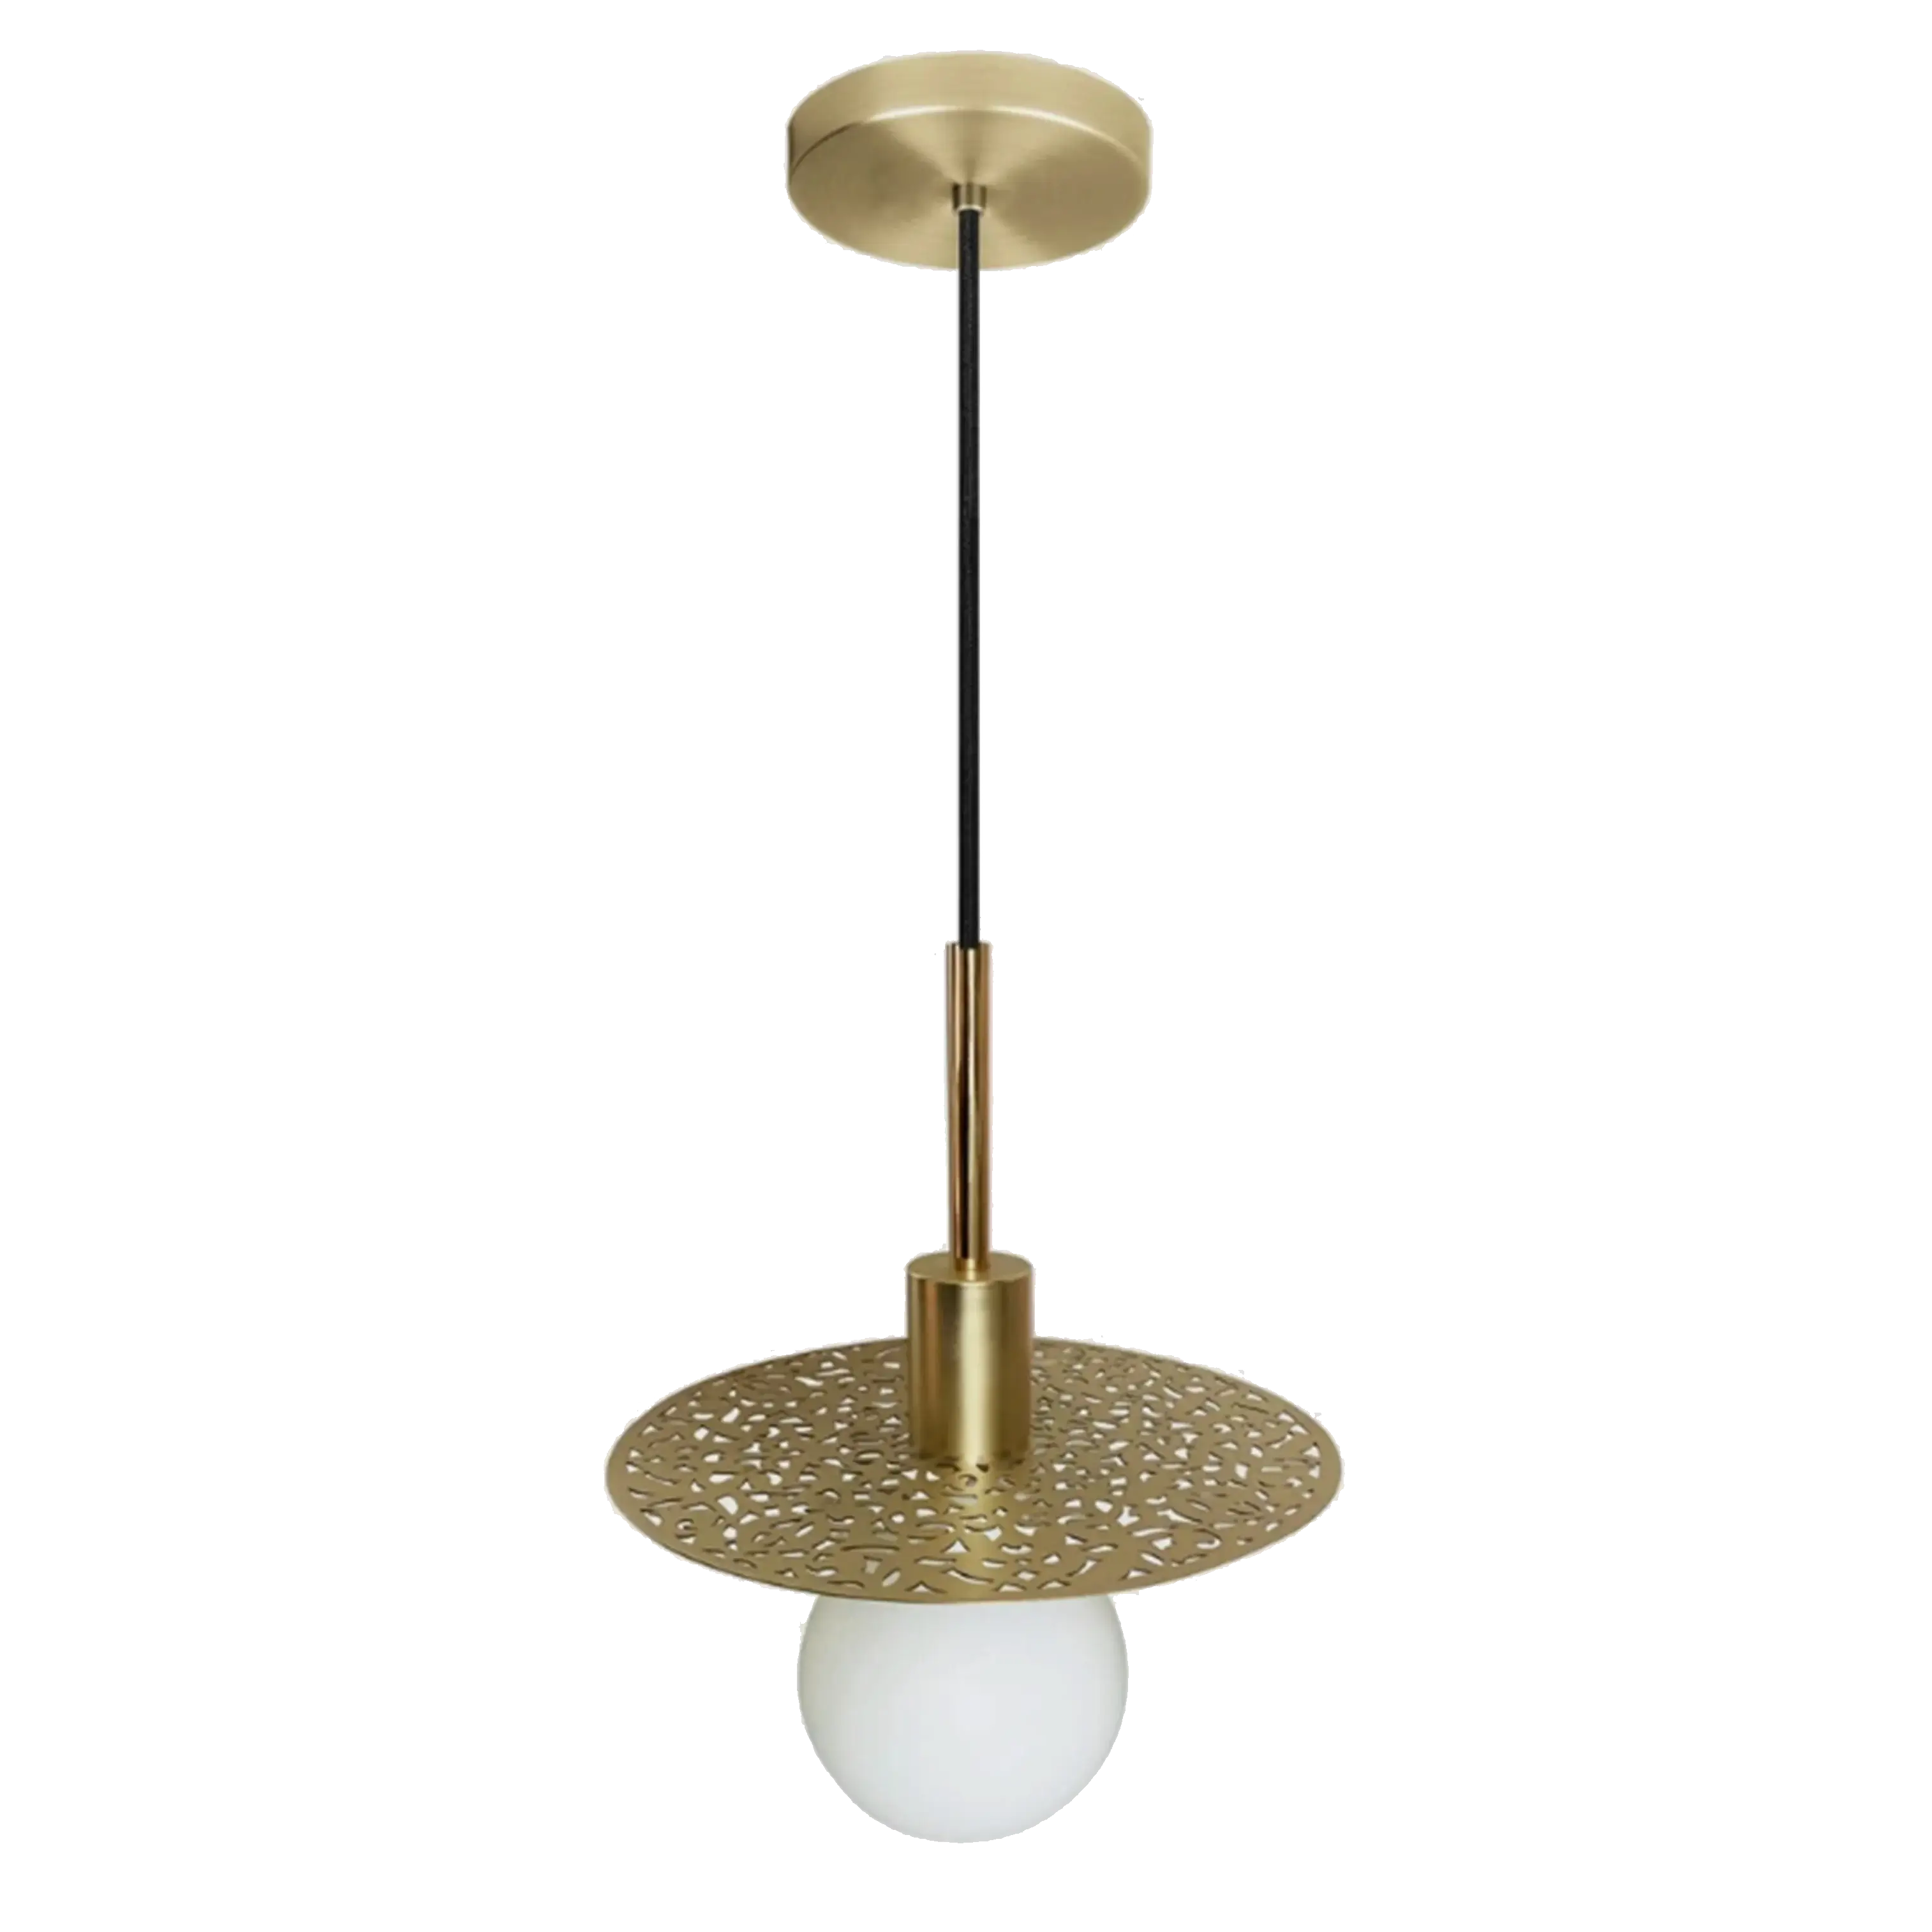 Dounia home Pendant light in polished  brass made of Metal, Model: Riad disc LED Suspension